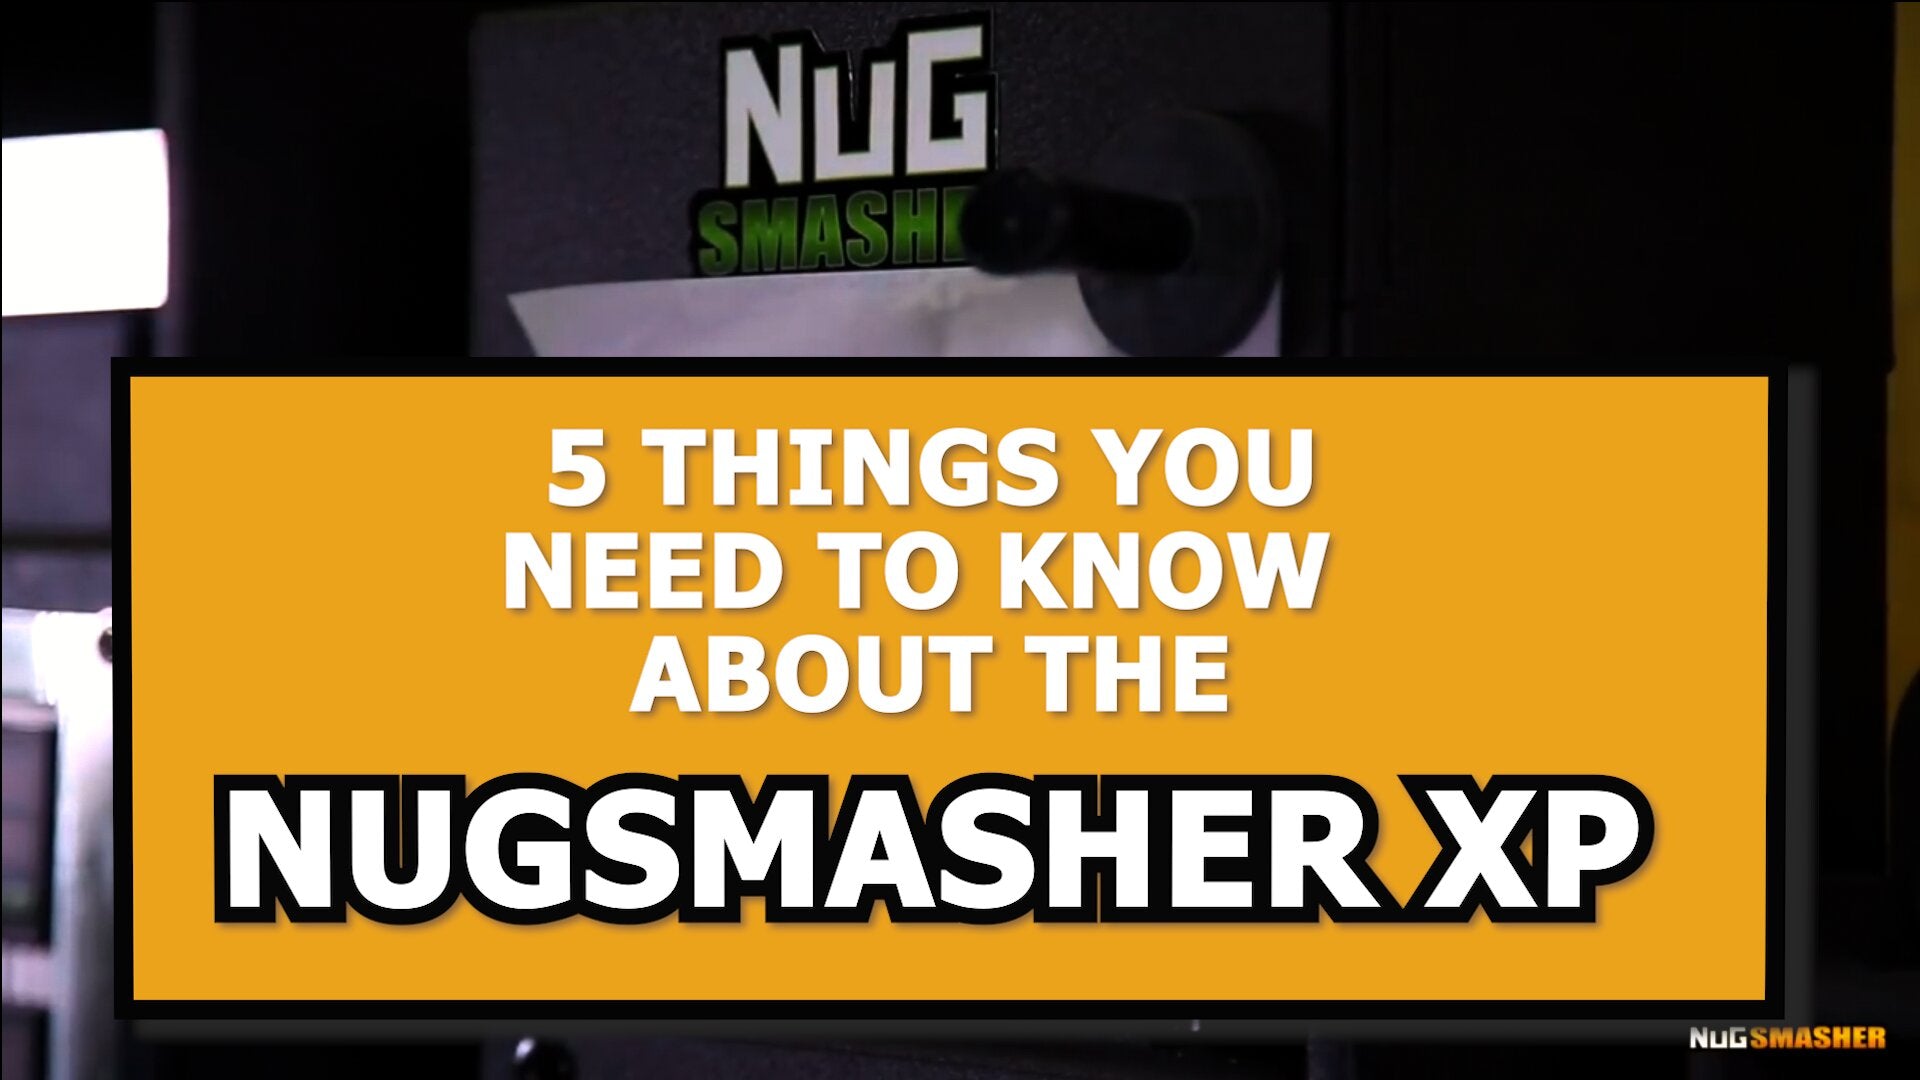 5 Things You Need To Know About the NugSmasher XP